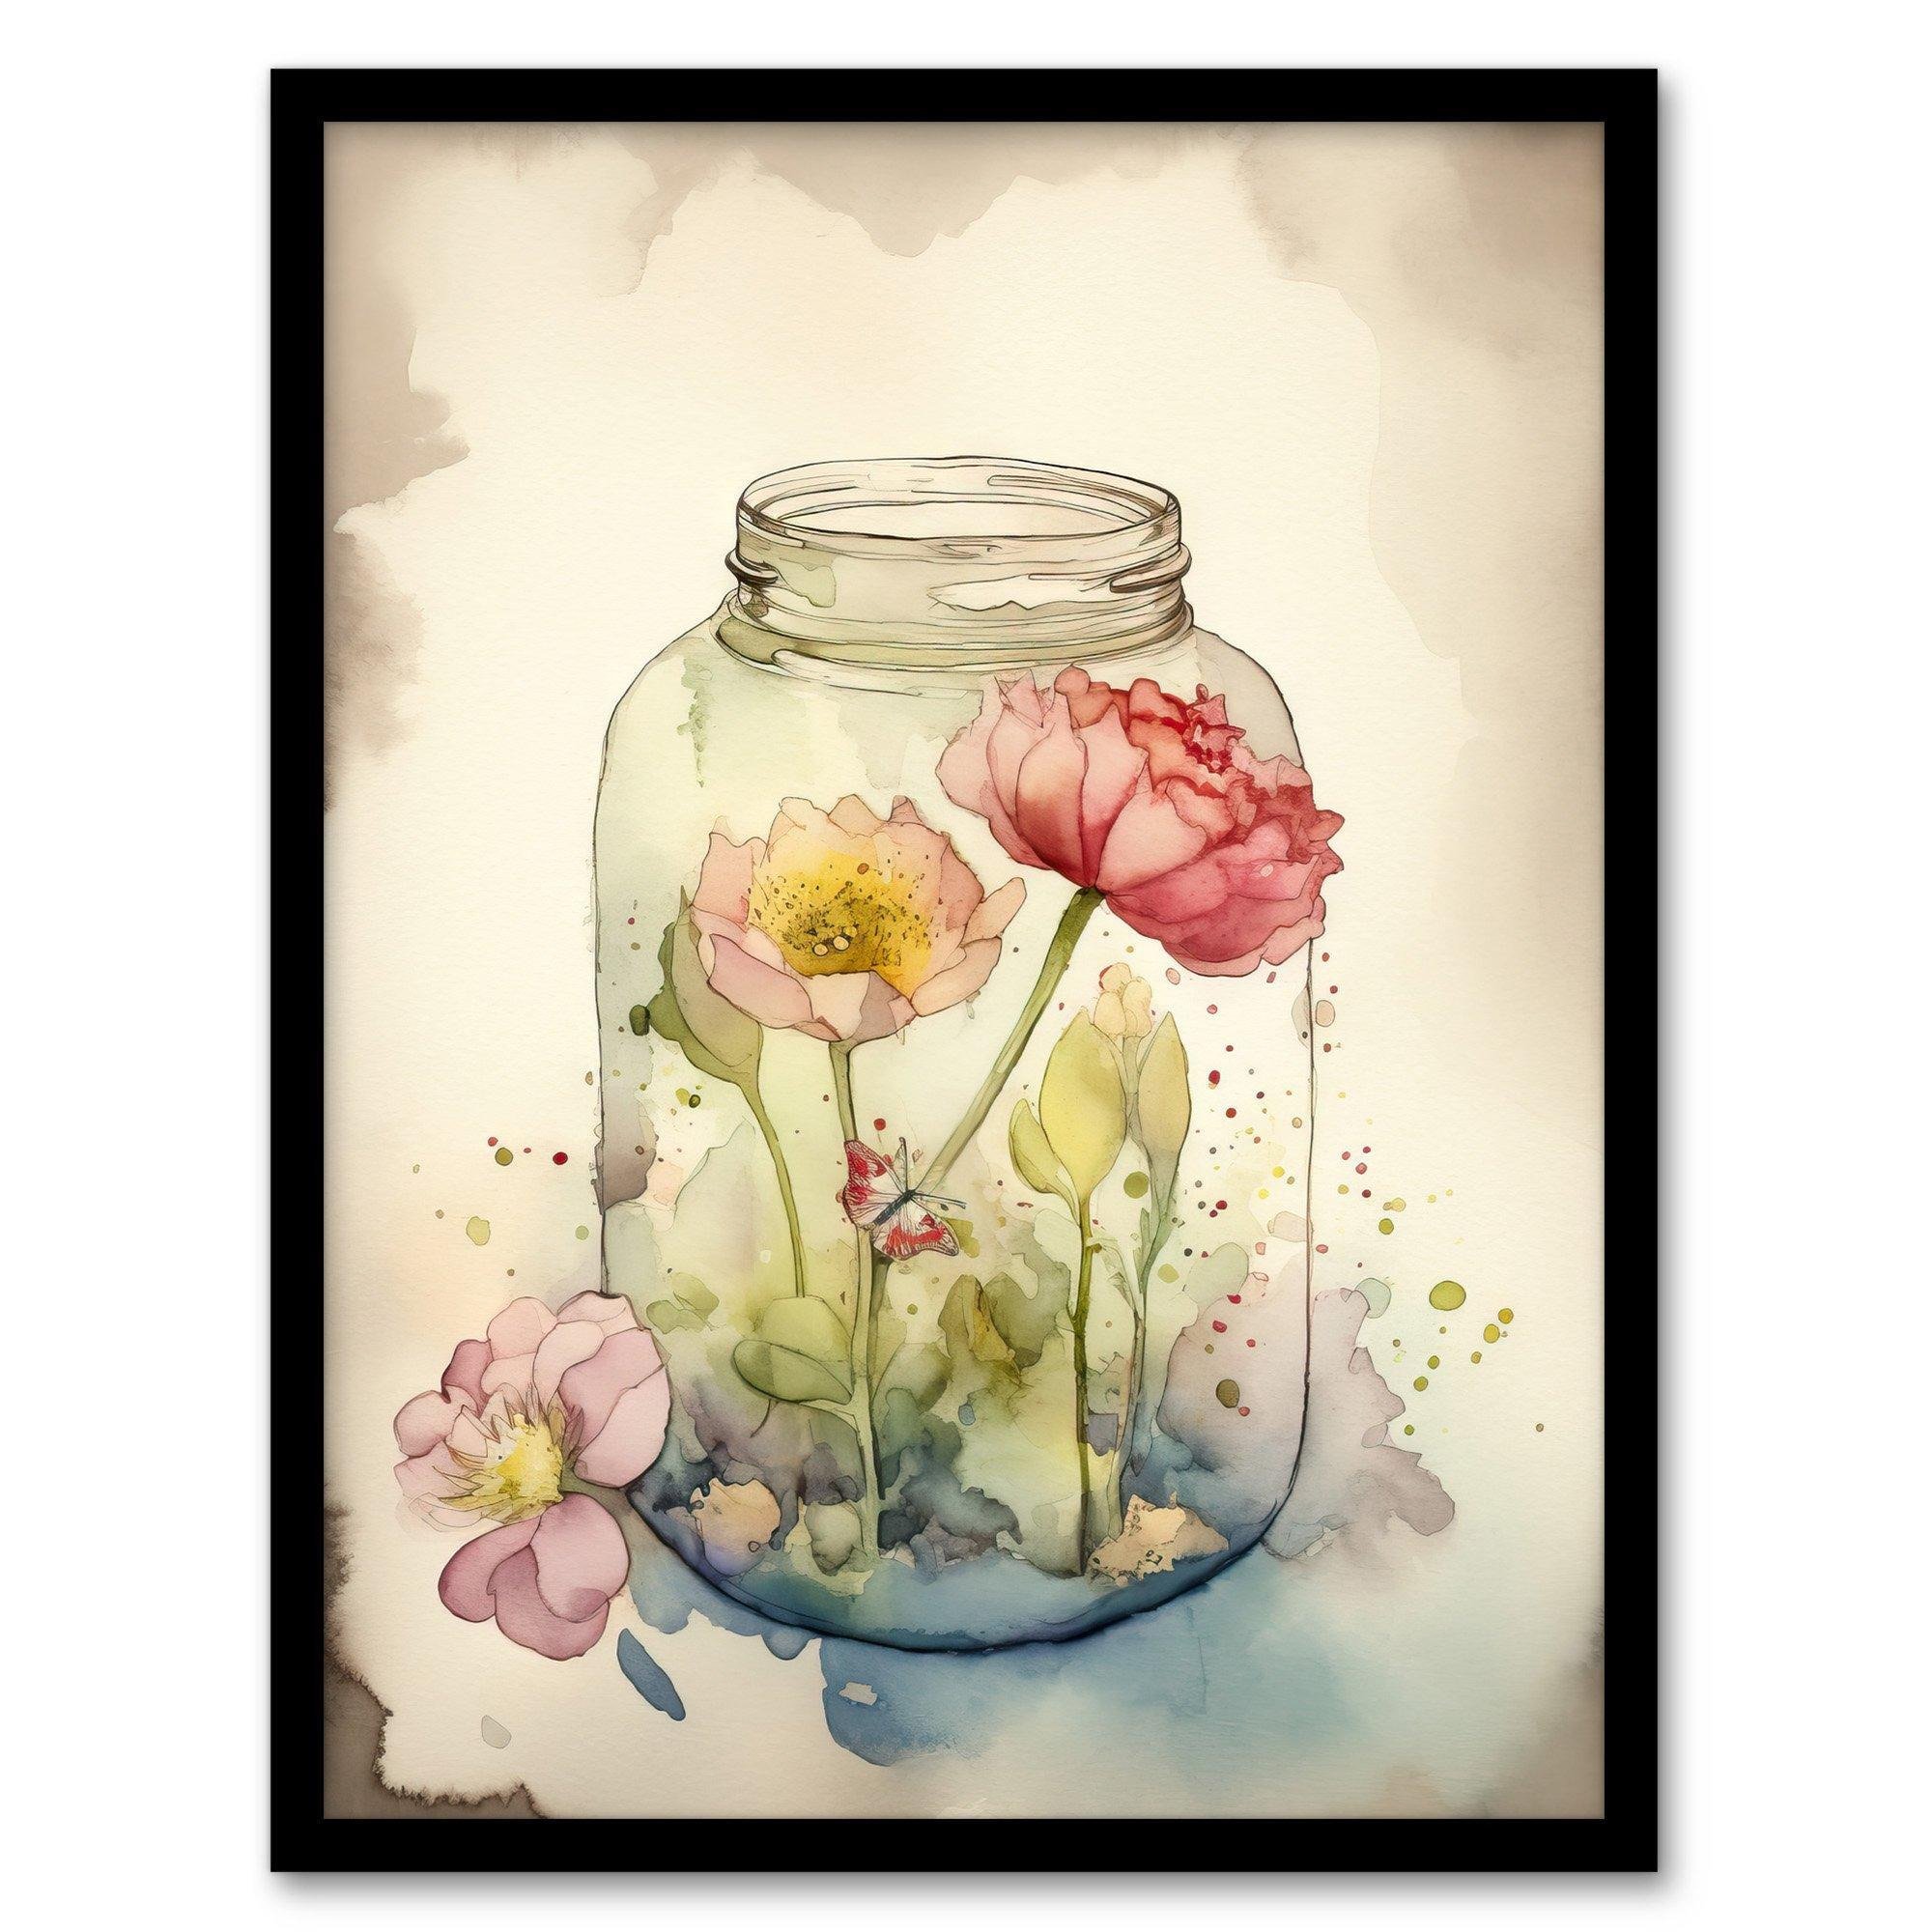 Wildflowers In Glass Jar Soft Watercolour Painting Pink Spring Flowers Blooms Nature Colourful Bright Floral Modern Artwork Art Print Framed Poster Wall Decor - image 1